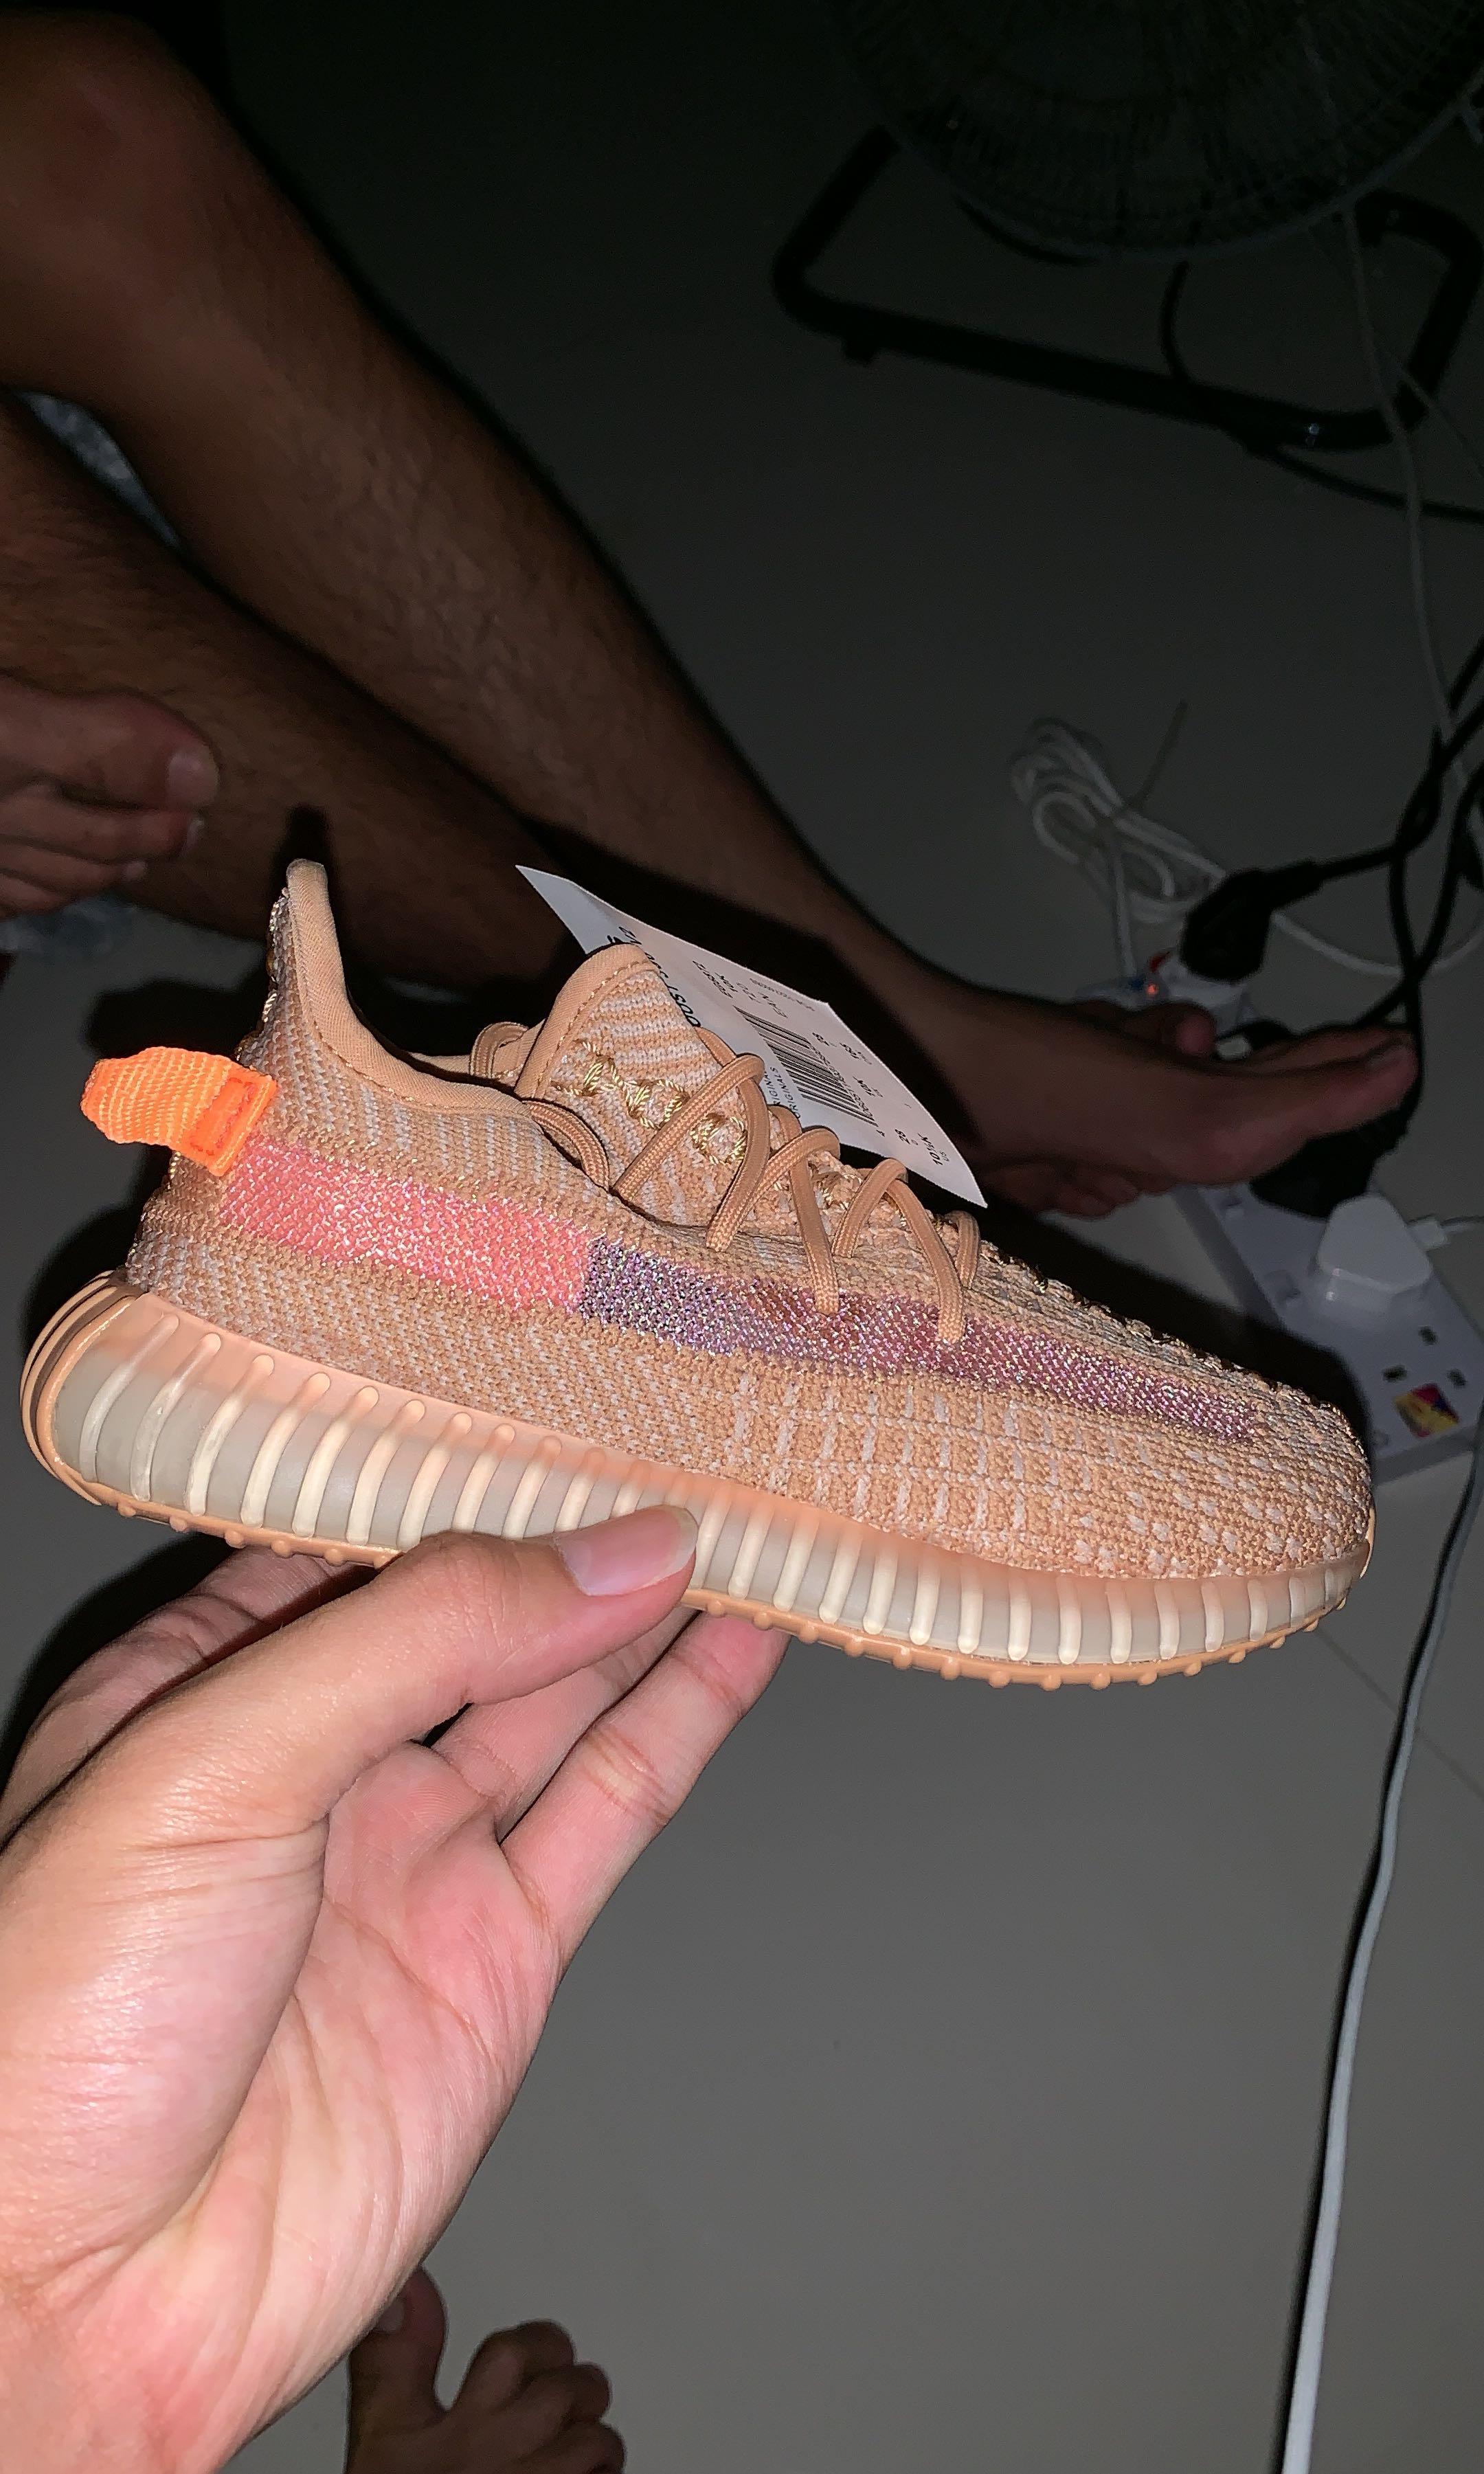 yeezy 350 clay real